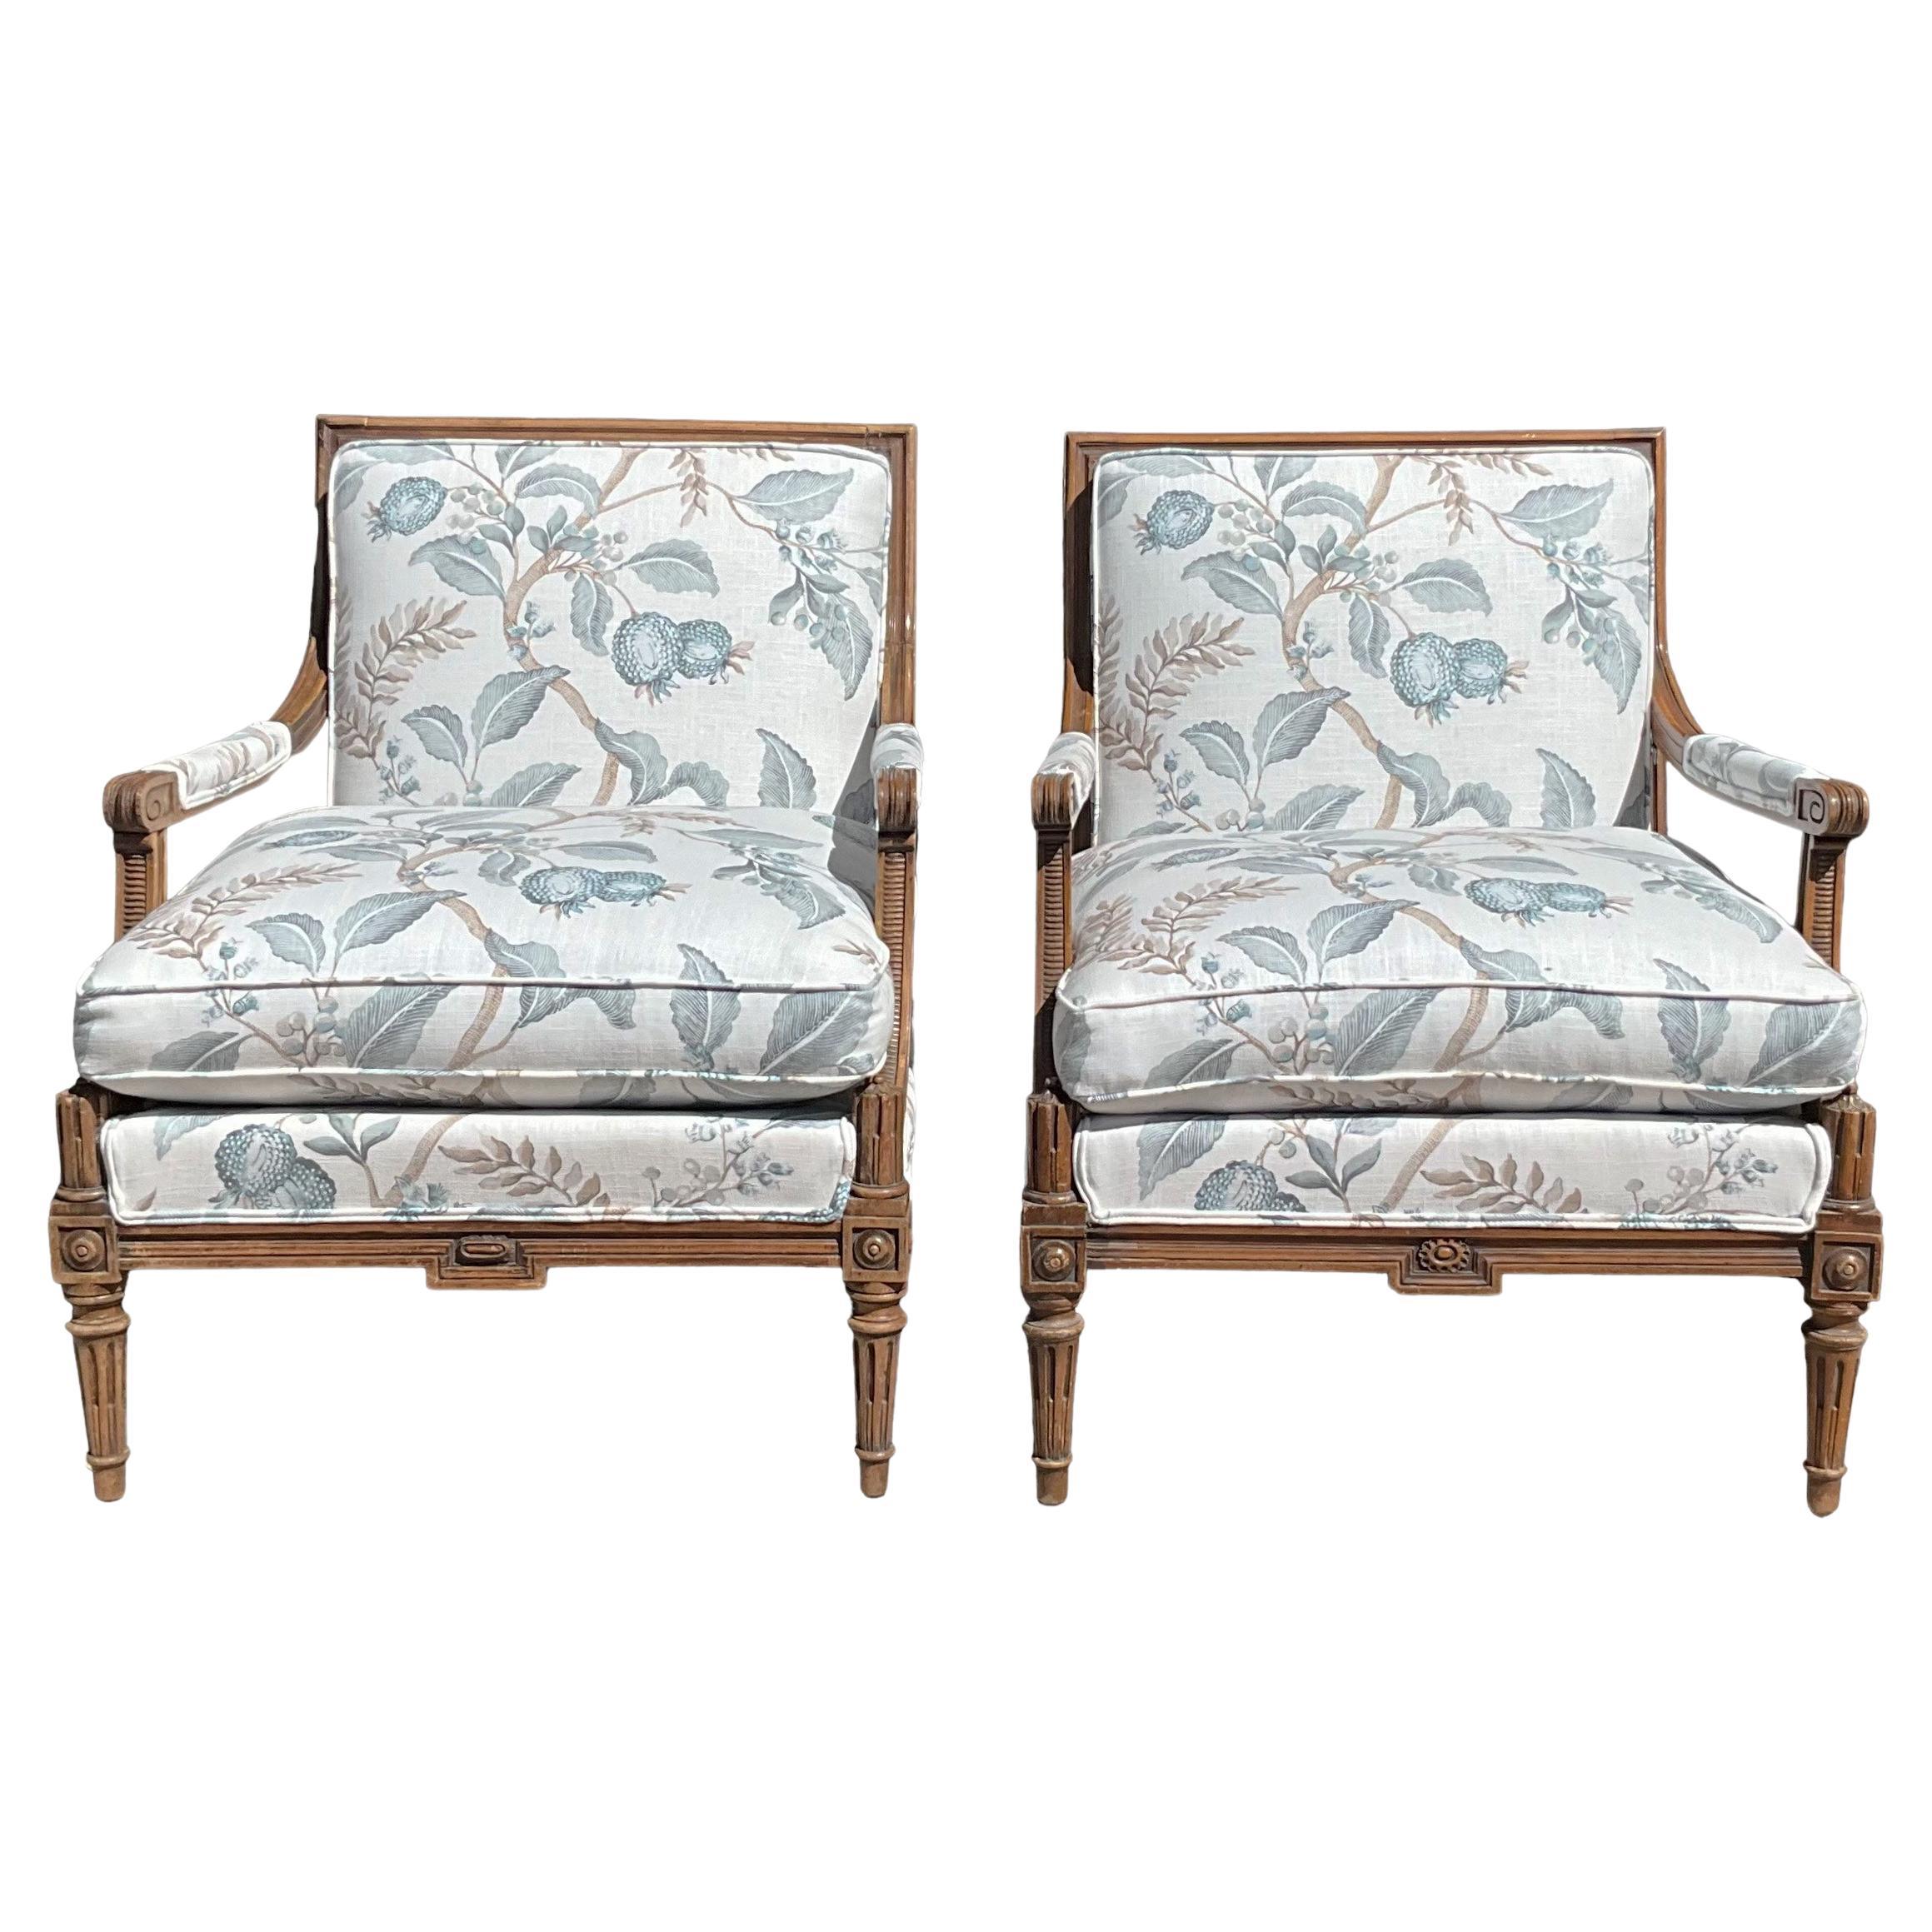 Early 20th-C. French Carved Walnut Bergere Chairs In New Floral Linen -Pair